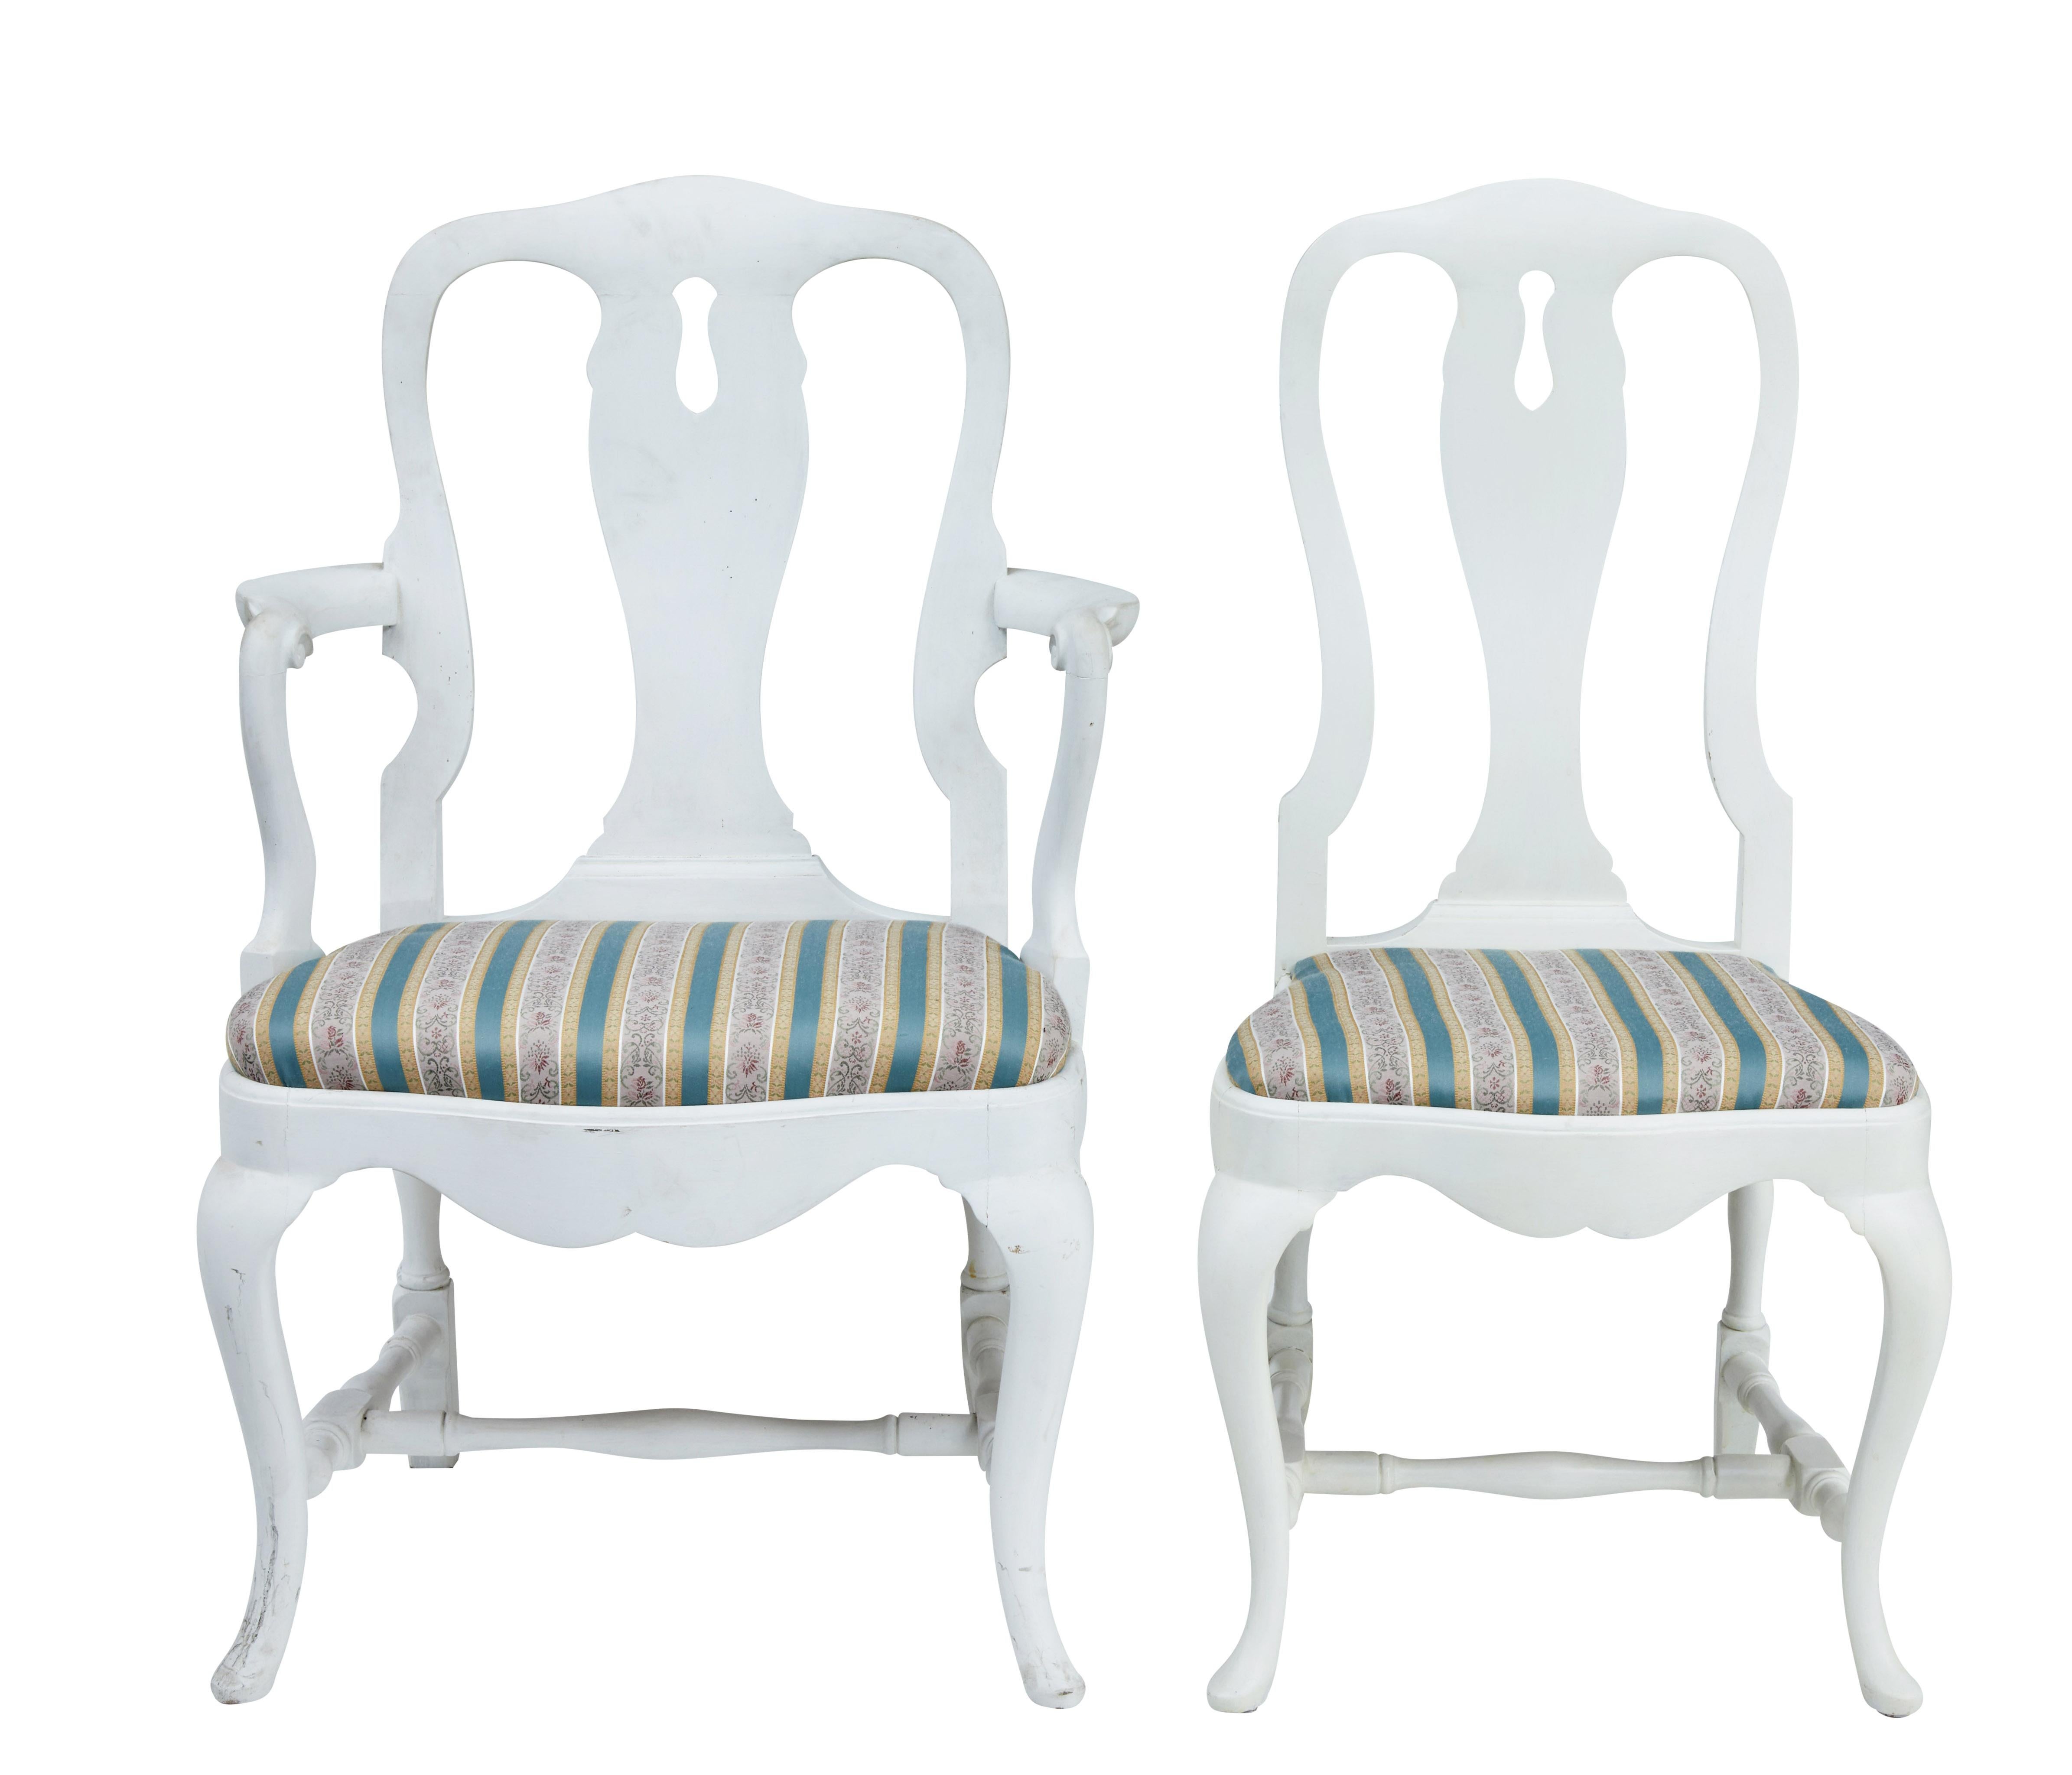 Set of 14 1920s Queen Anne design dining chairs, circa 1920.

Set comprises of 12 single chairs and 2 carver armchairs. Made in beech and later painted white.

Shaped Queen Anne design backs, with drop in seats which are in good usable